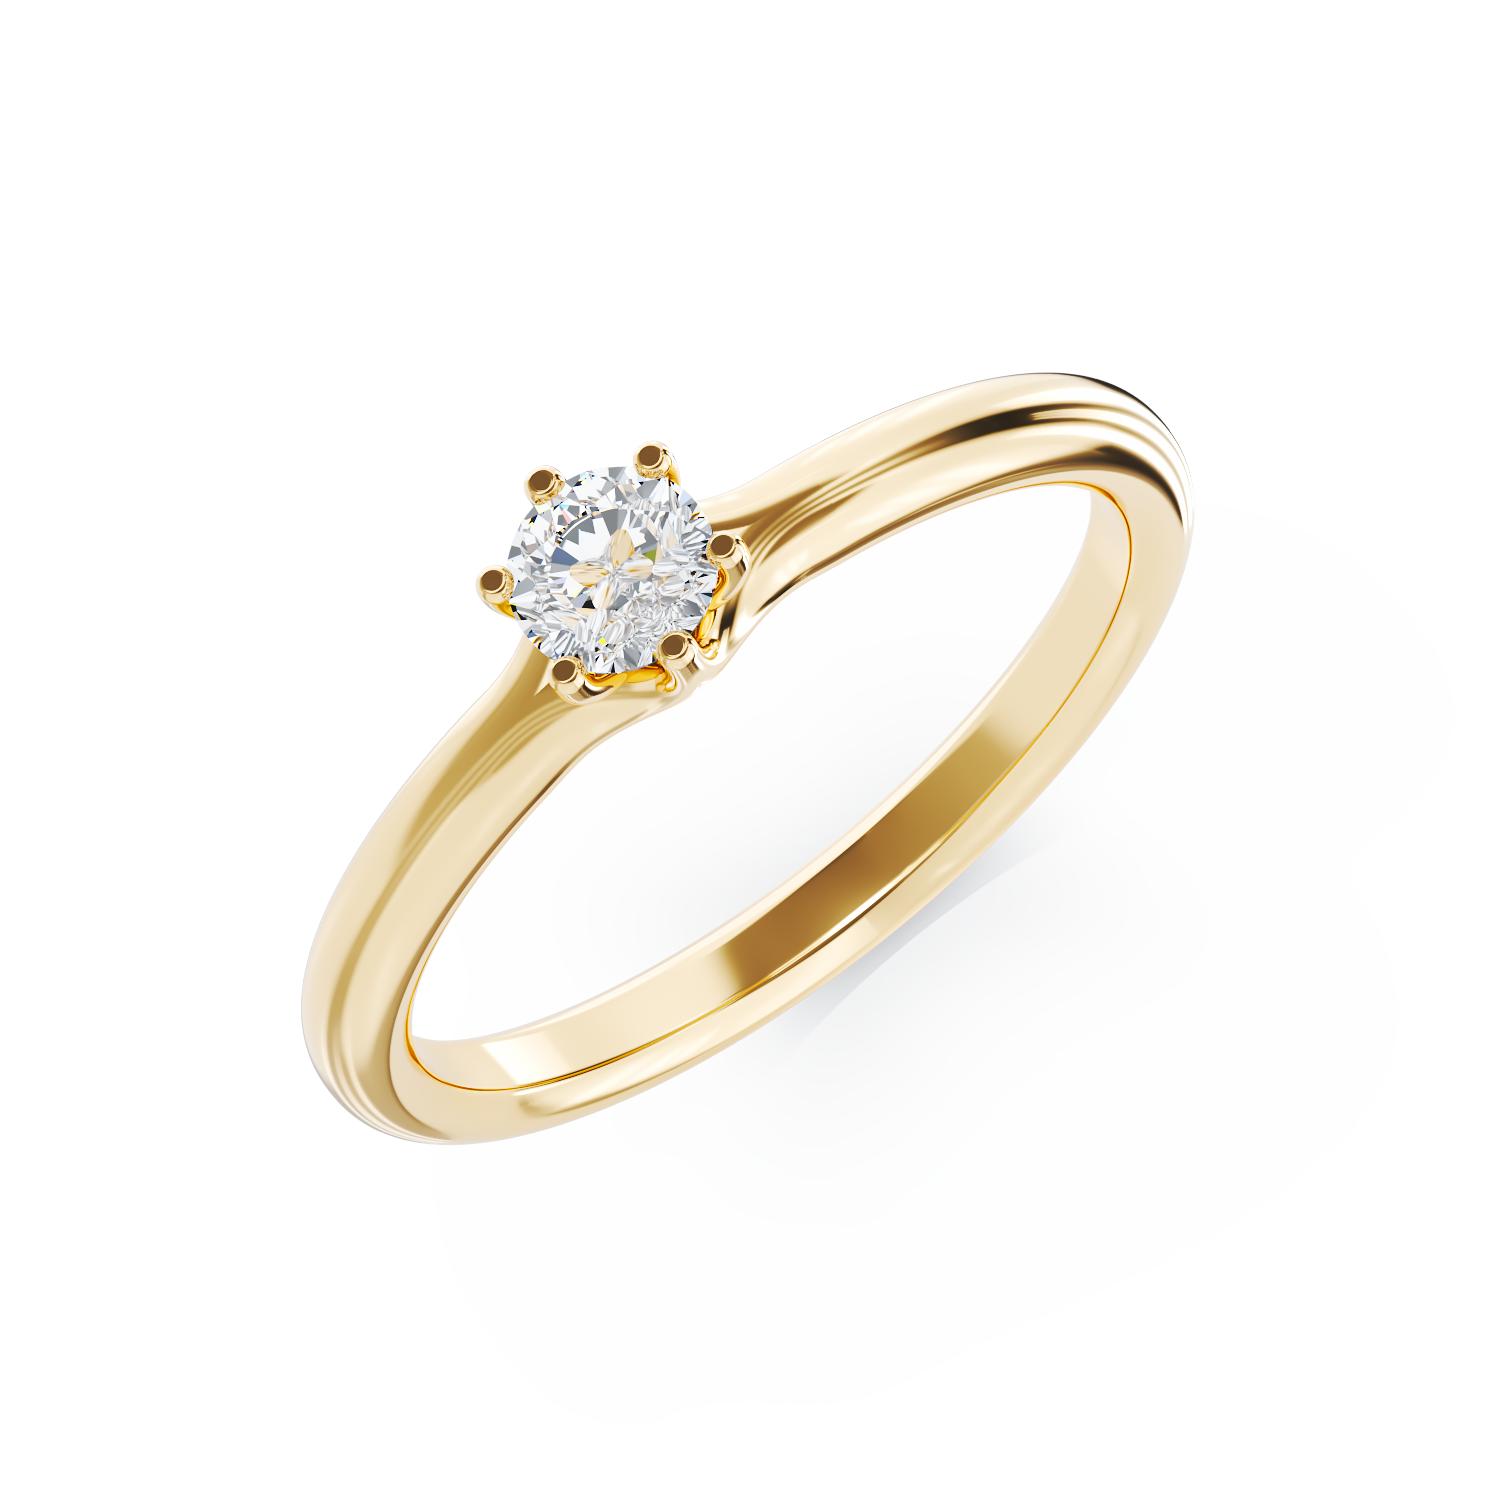 18K yellow gold engagement ring with a 0.25ct solitaire diamond